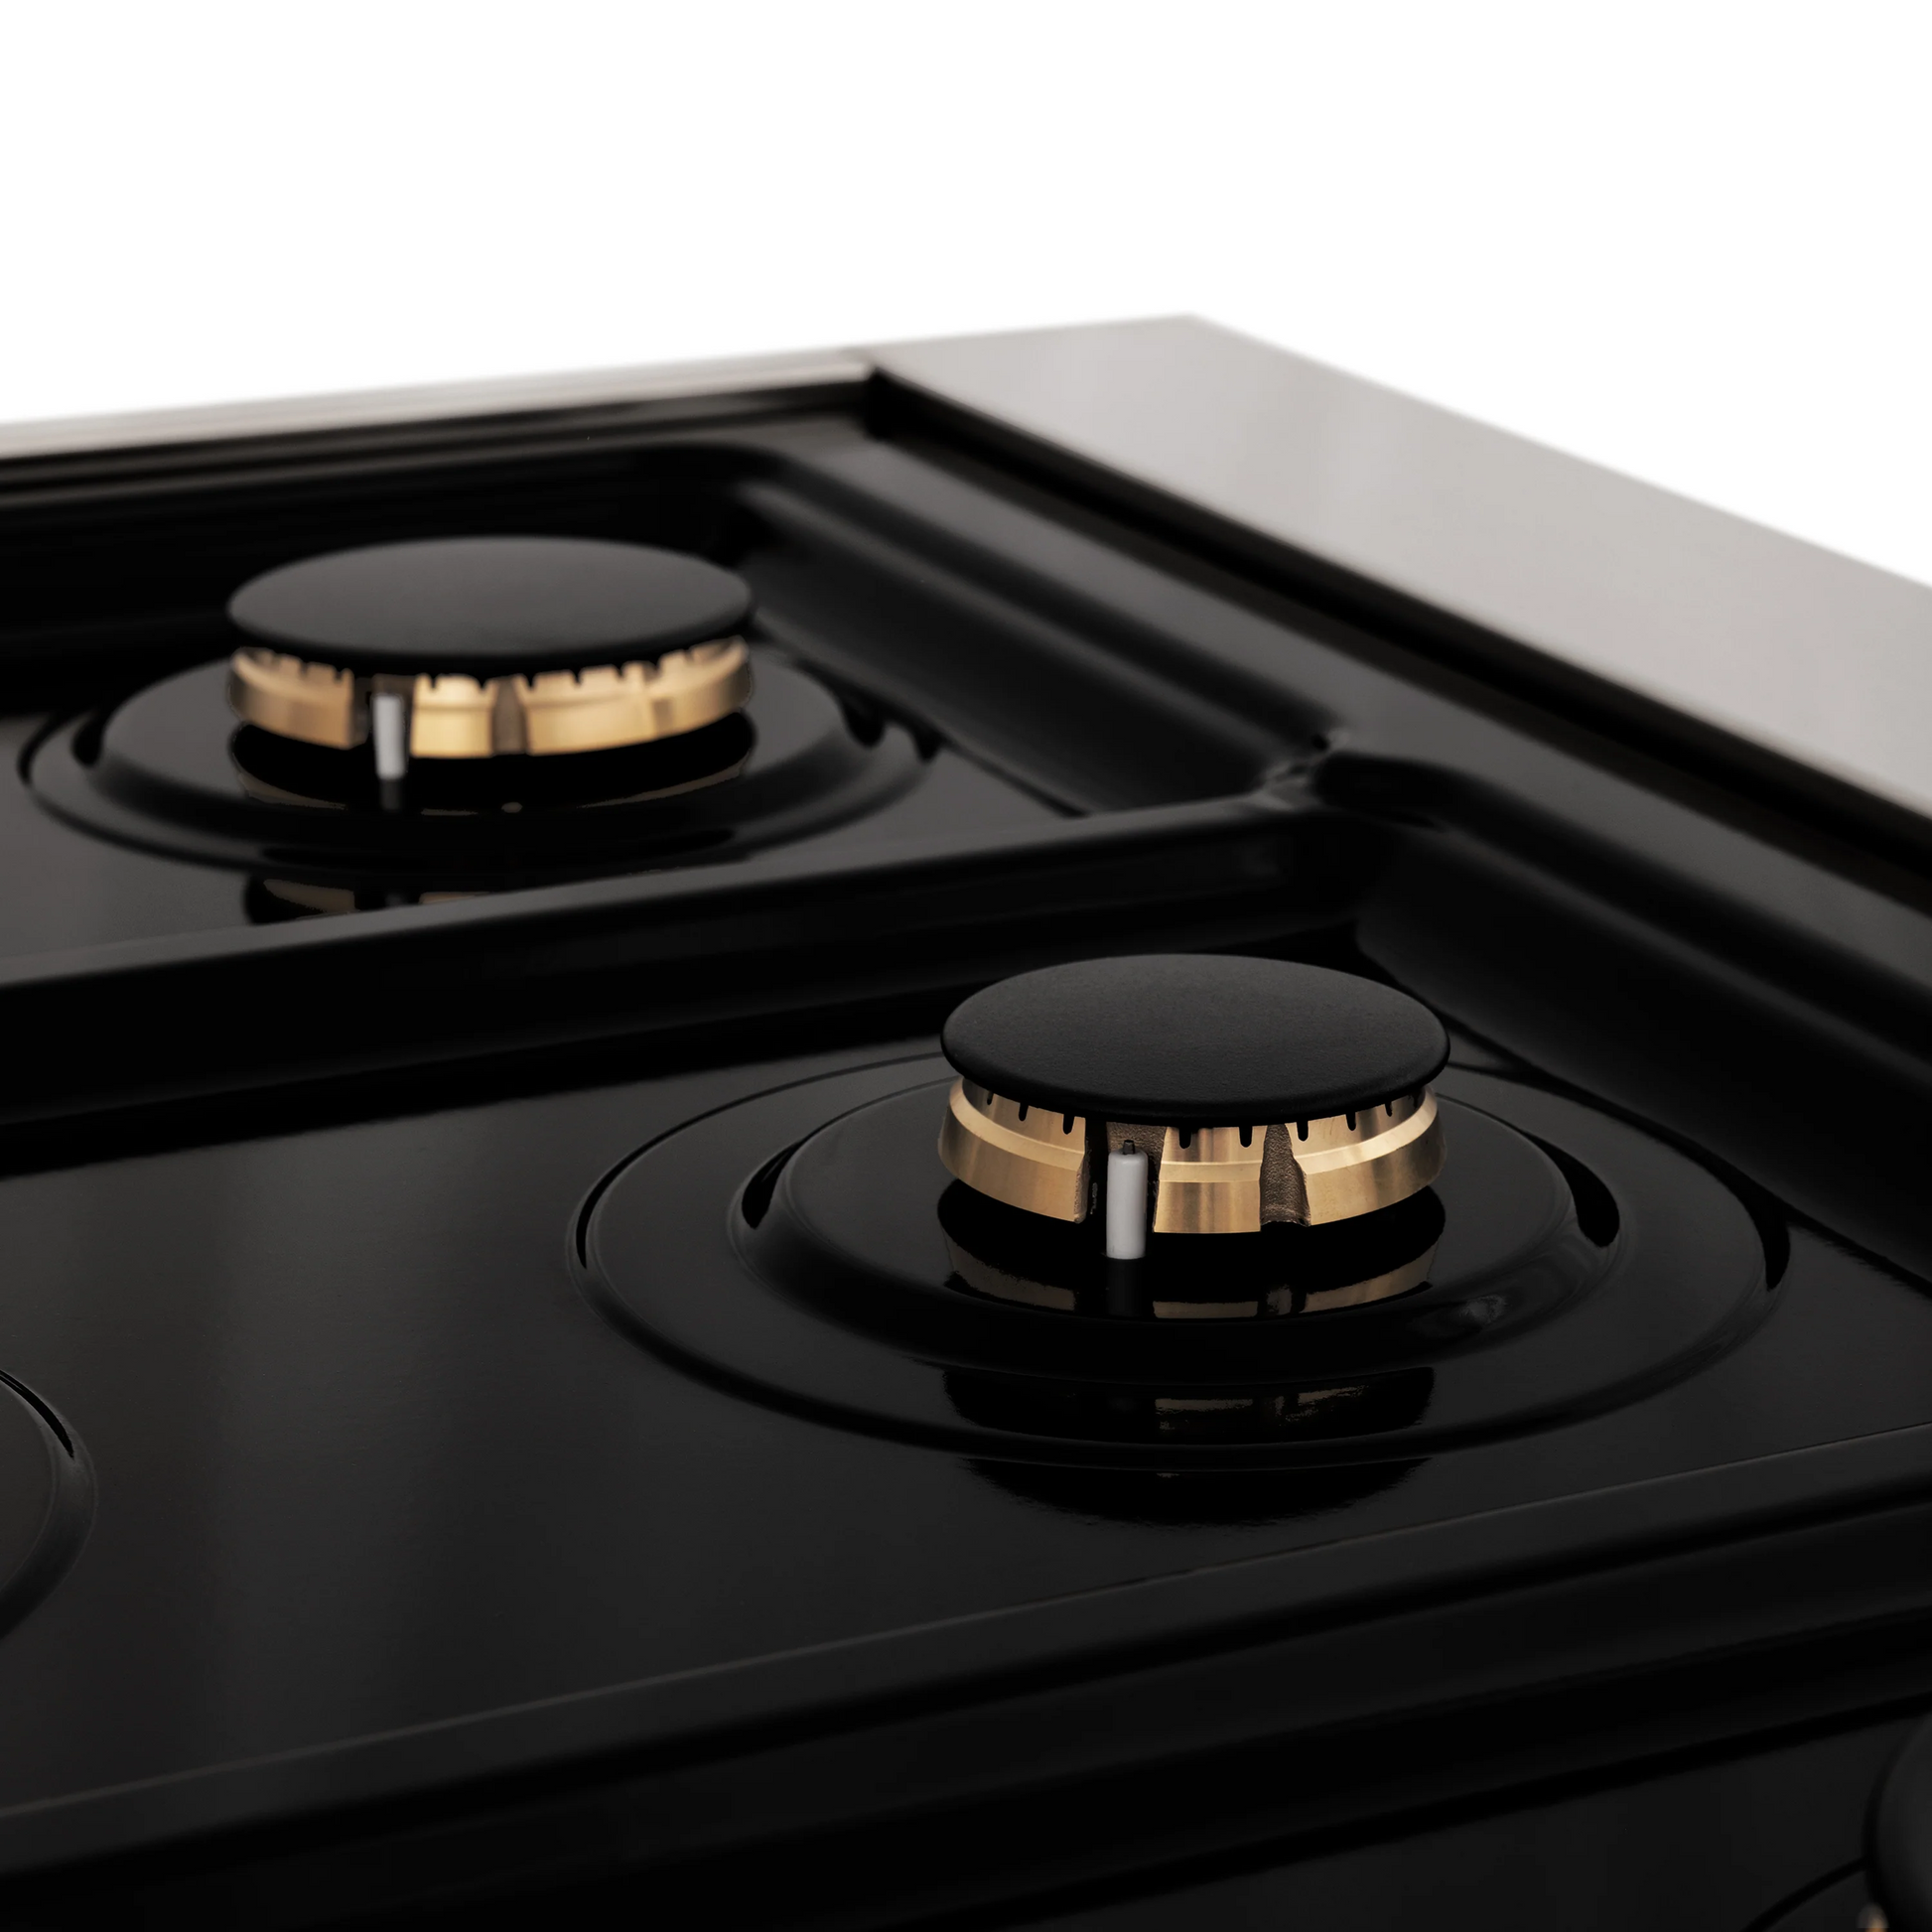 ZLINE Autograph Edition 36" Porcelain Rangetop With 6 Gas Burners in Stainless Steel and Gold Accents